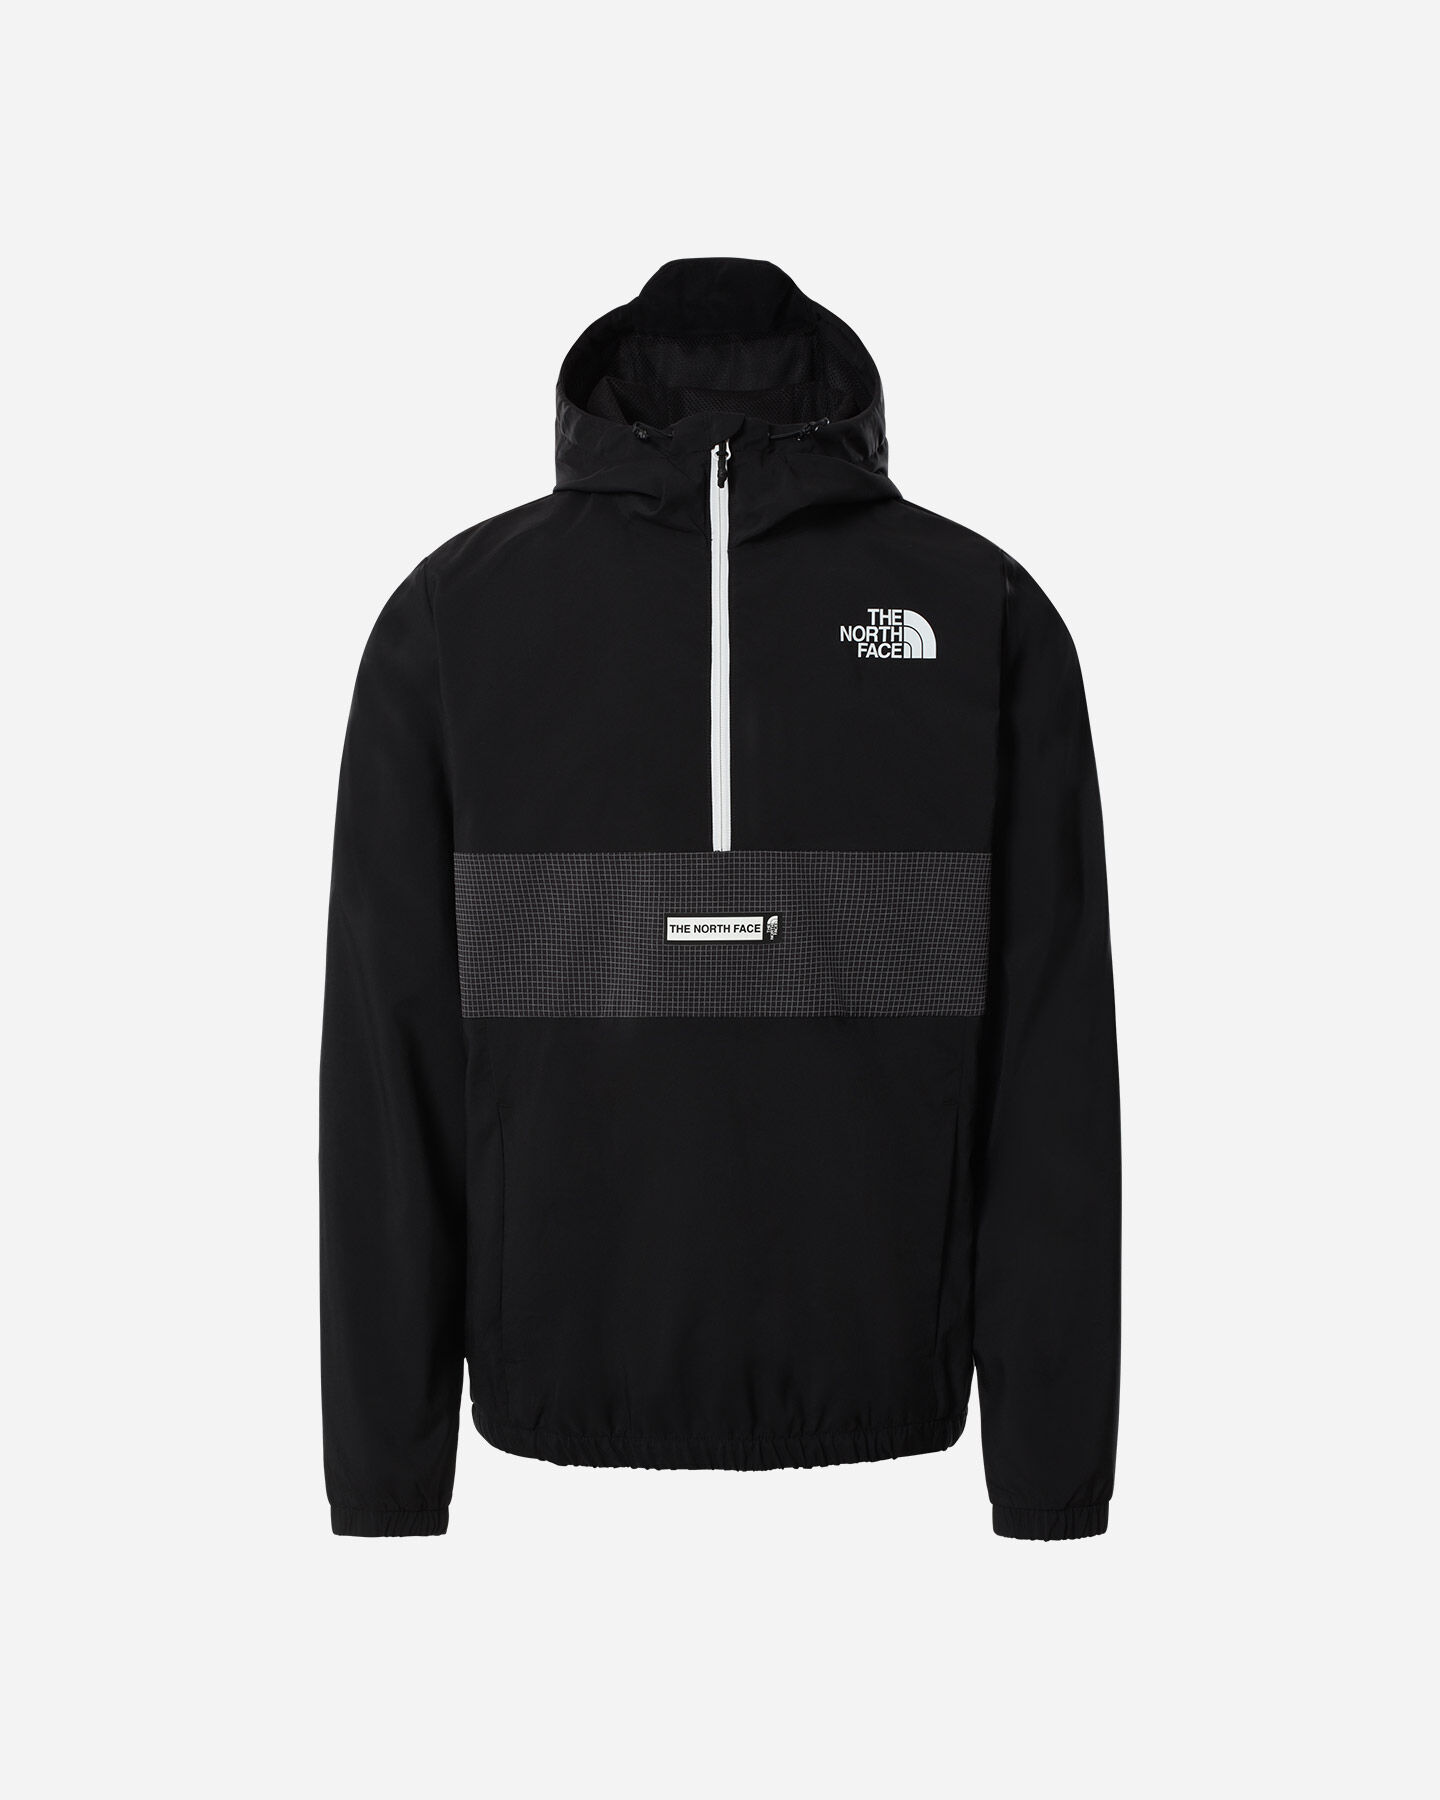  Felpa THE NORTH FACE ZIP HOODIE M S5348769|JK3|XS scatto 0